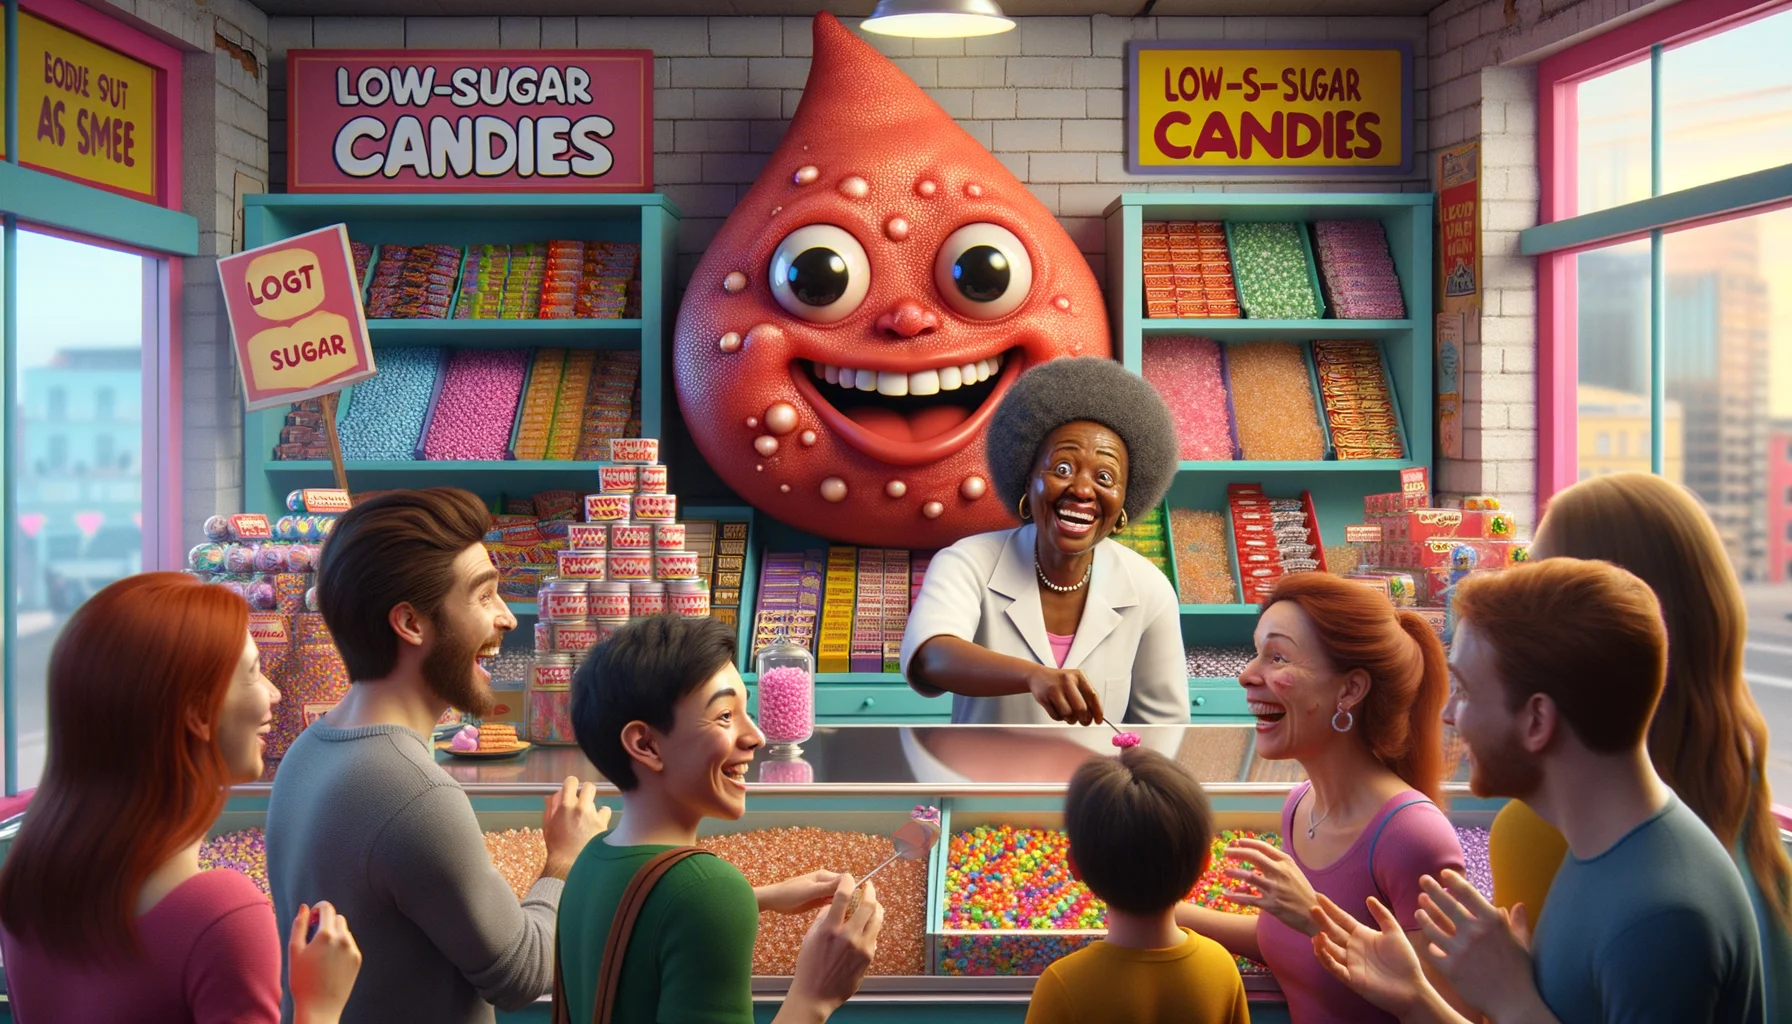 A humorous, realistic image embodies the perfection of a scenario focusing on 'Low-Sugar Candies for Acne Prevention'. Picture a bustling candy shop owned by a cheerful African lady with the backdrop filled with shelves stocked with various brightly colored candies labelled 'Low-Sugar'. Her glee-filled Caucasian male assistant is handing out samples to delighted customers of diverse descents and genders. Suddenly, a giant red pimple character with googly eyes and frowning face peeks through the window, showing an expression of disappointment and retreat. This sudden sight causes everyone in the shop to burst into laughter, further elevating the lively atmosphere of the sweet shop.